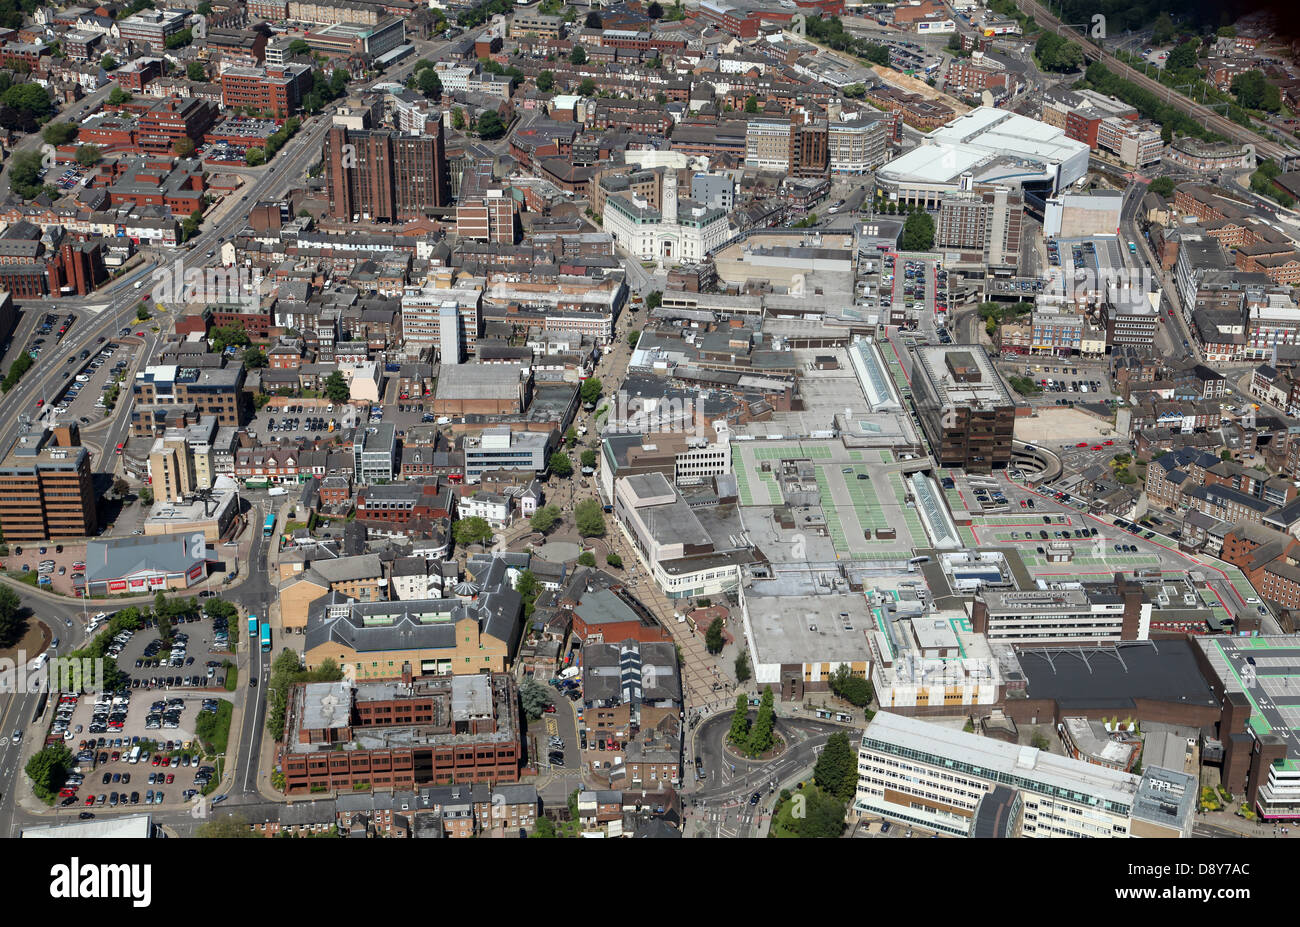 aerial view of Luton town centre Stock Photo: 57146836 - Alamy